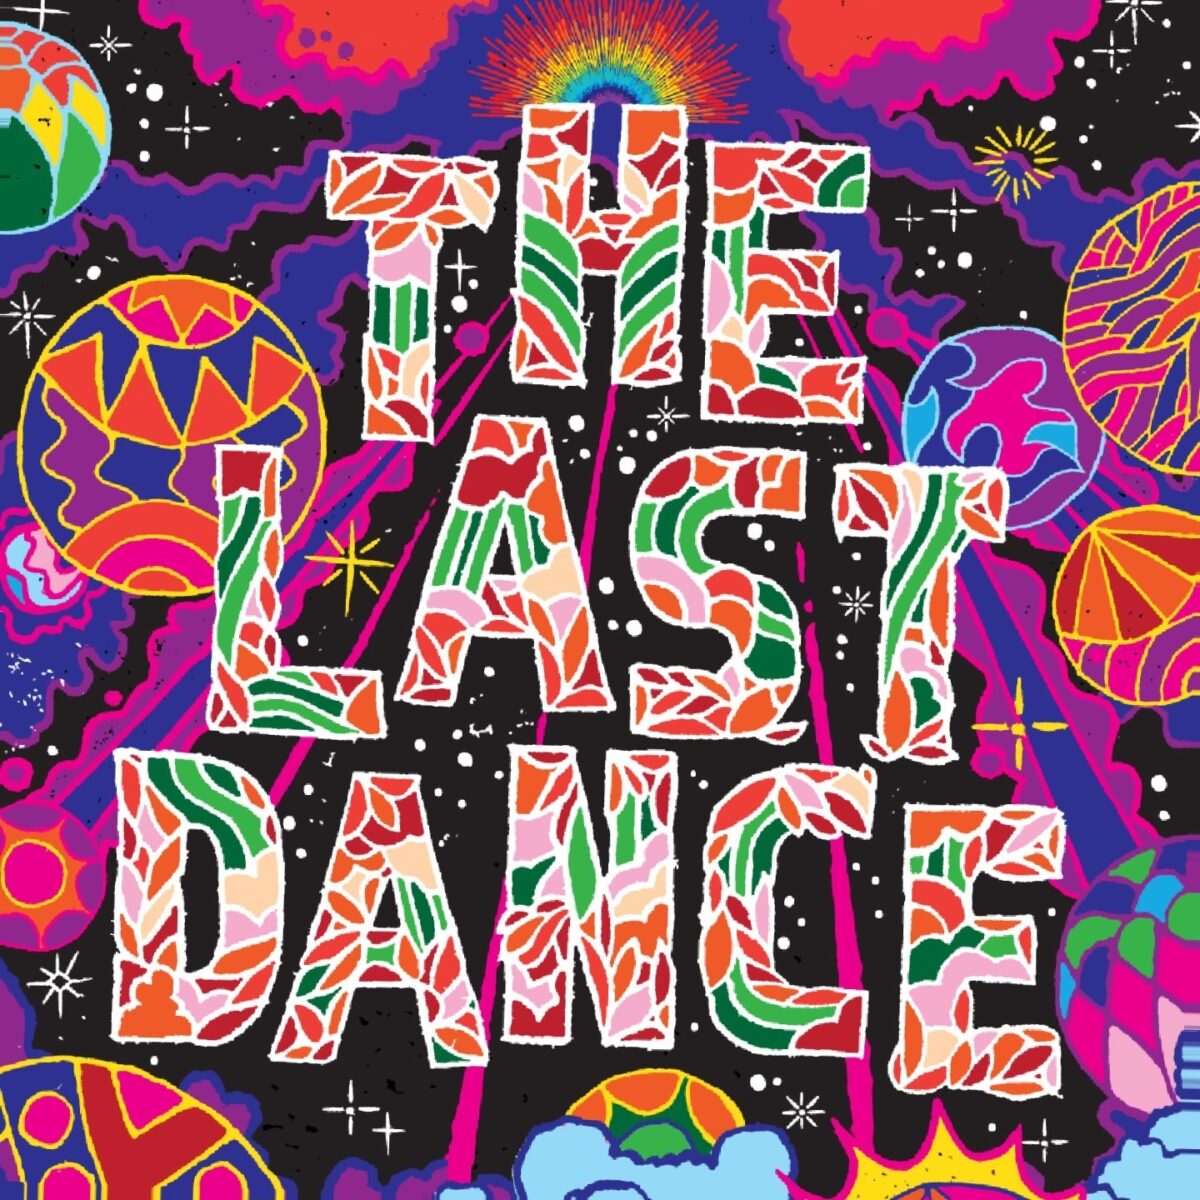 the last dance - welcome to the future